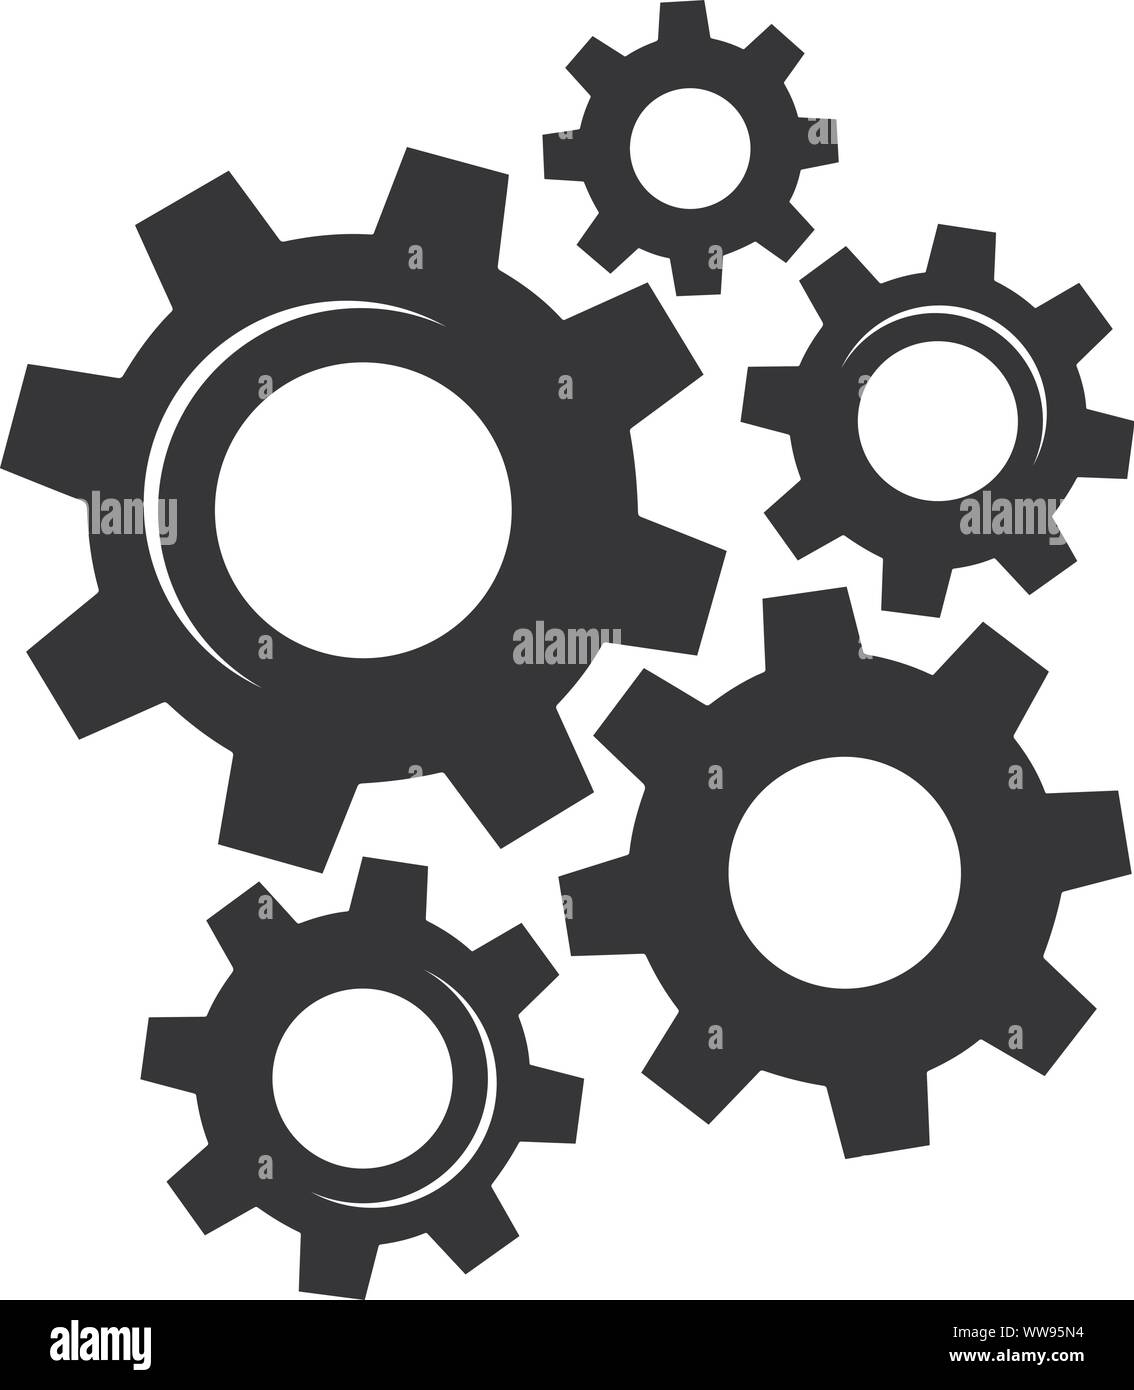 Gears and cogs vector illustration in black and white styles Stock Vector